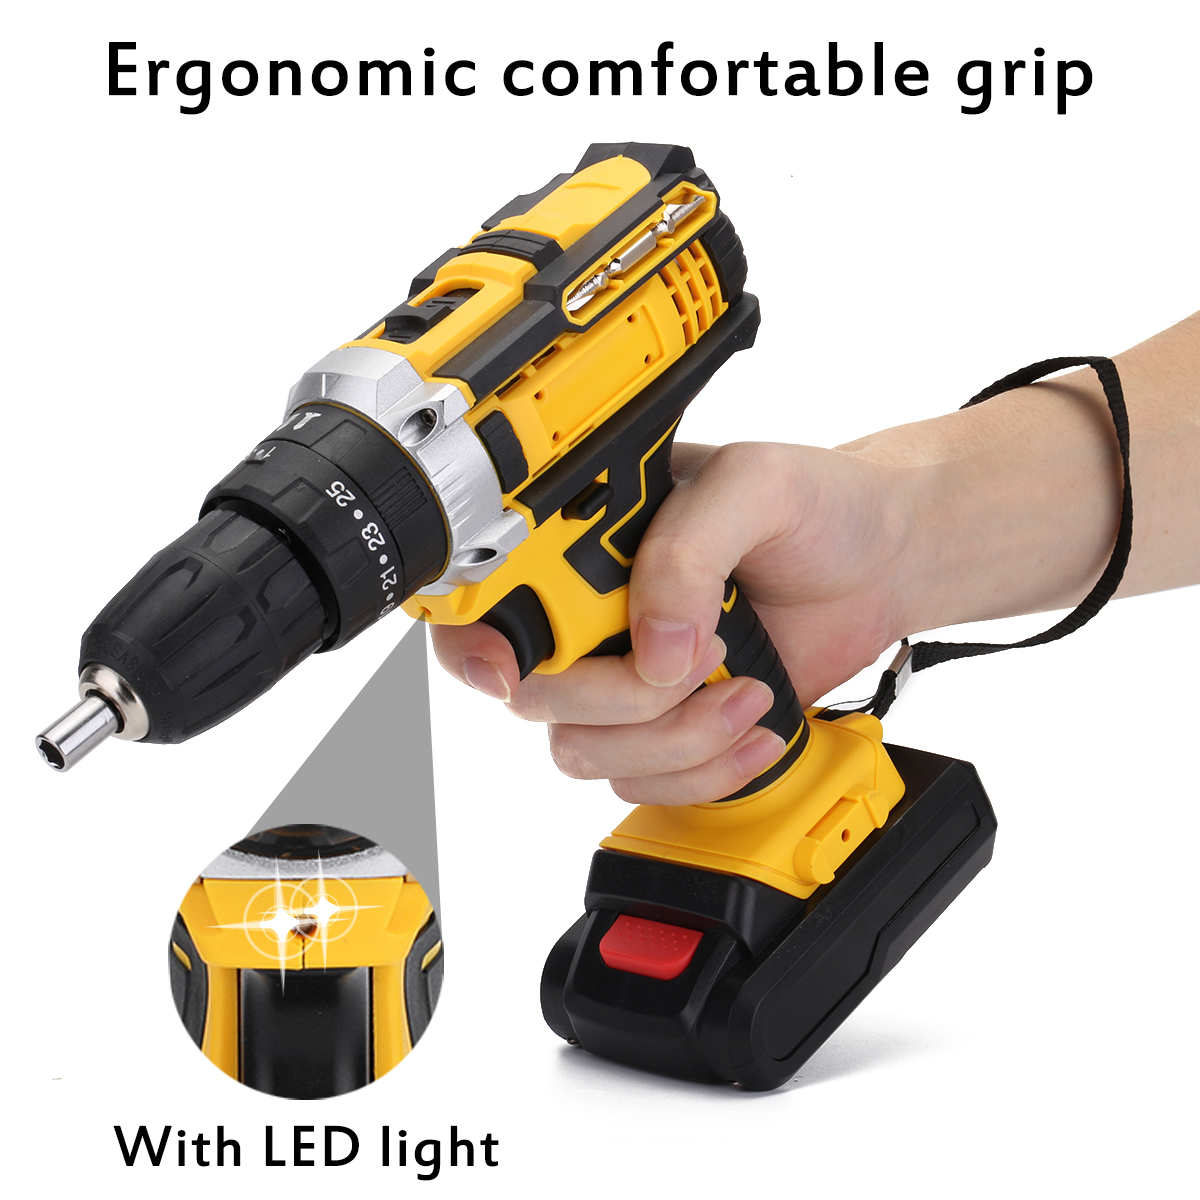 3-IN-1-Electric-Cordless-Impact-Hammer-Drill-Screwdriver-38Nm-High-Torque-Tool-1780452-4